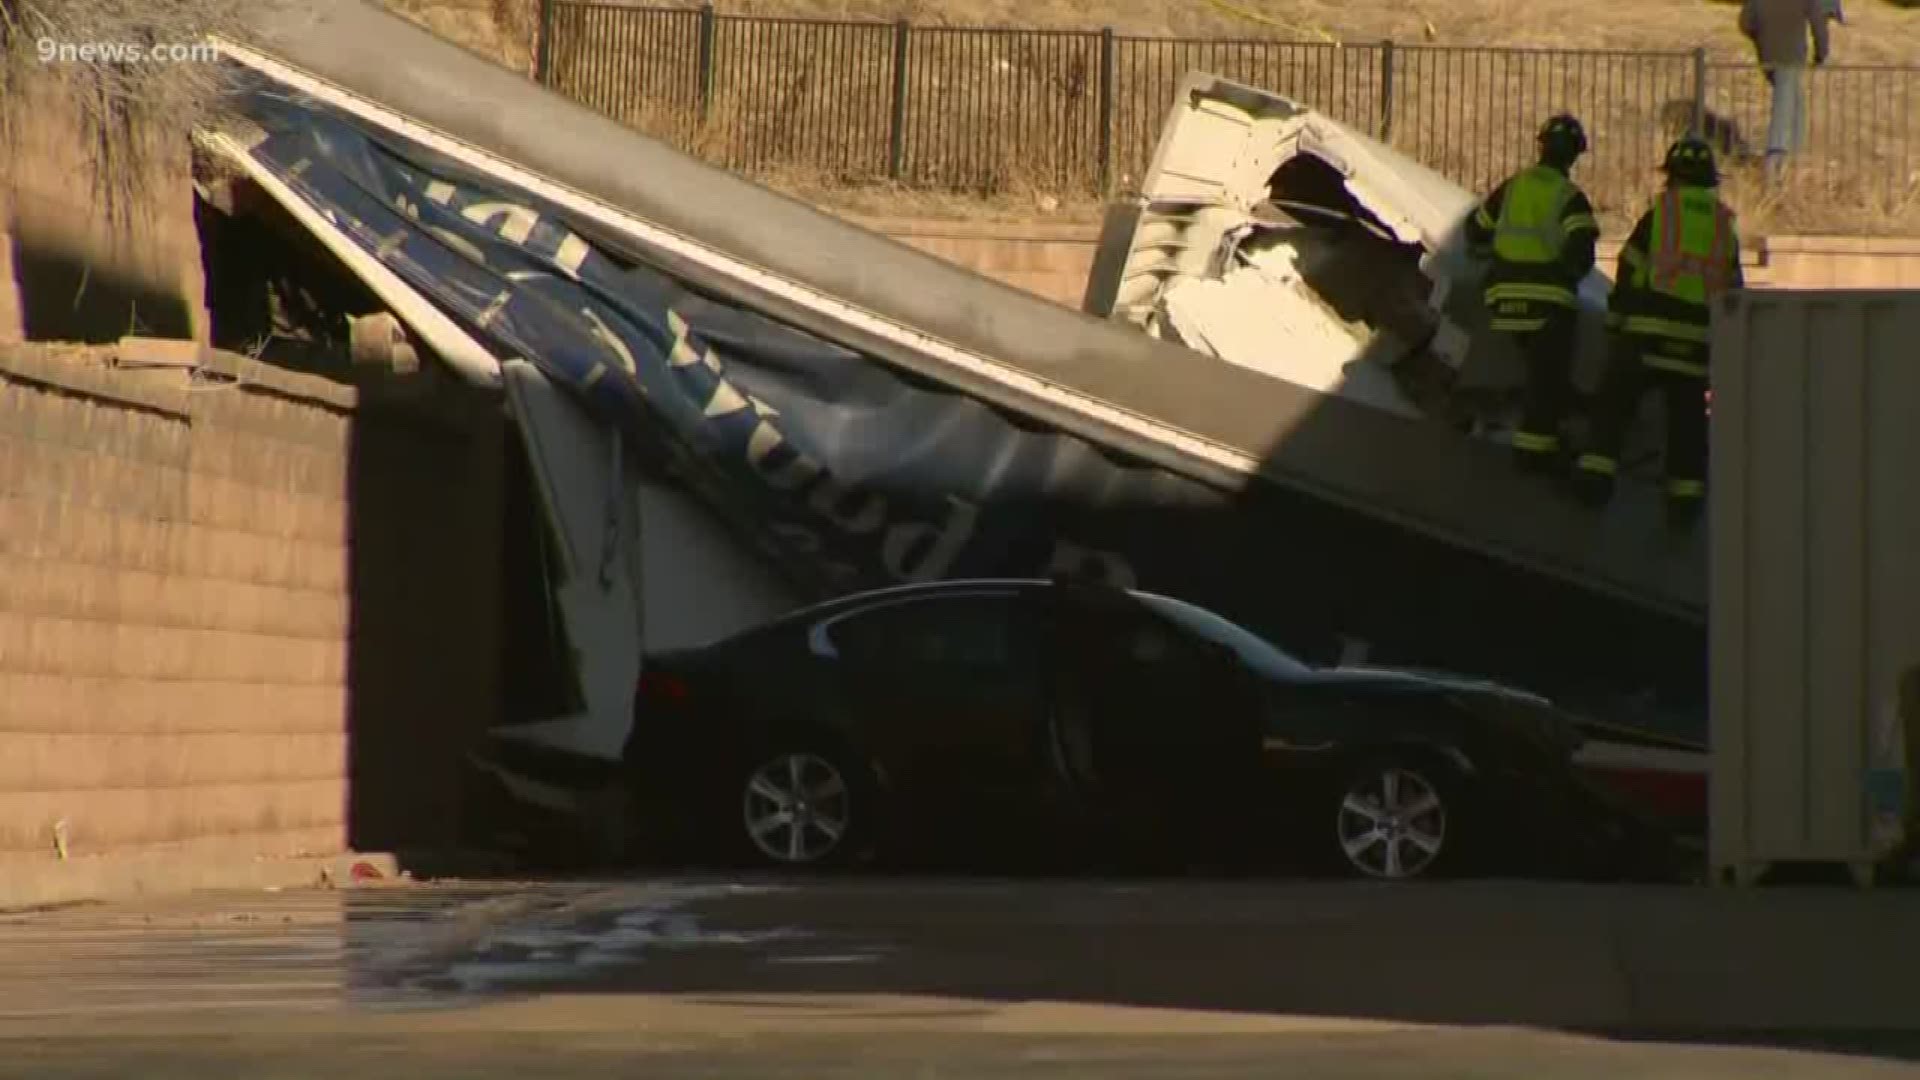 The crash happened at Founders Parkway near the I-25 interchange.